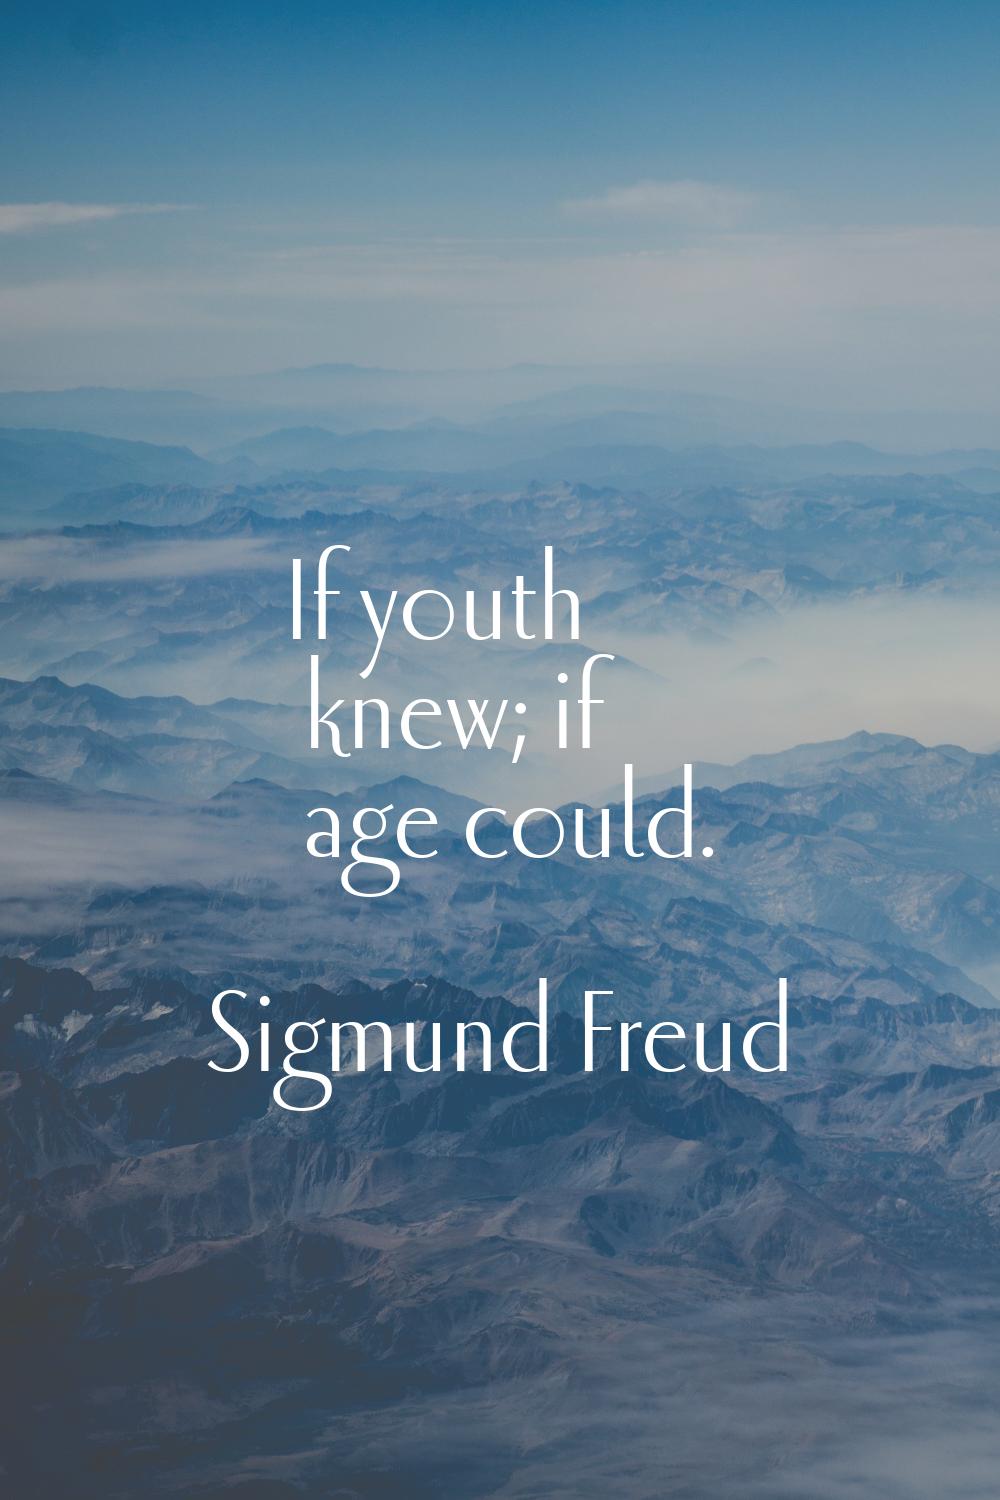 If youth knew; if age could.